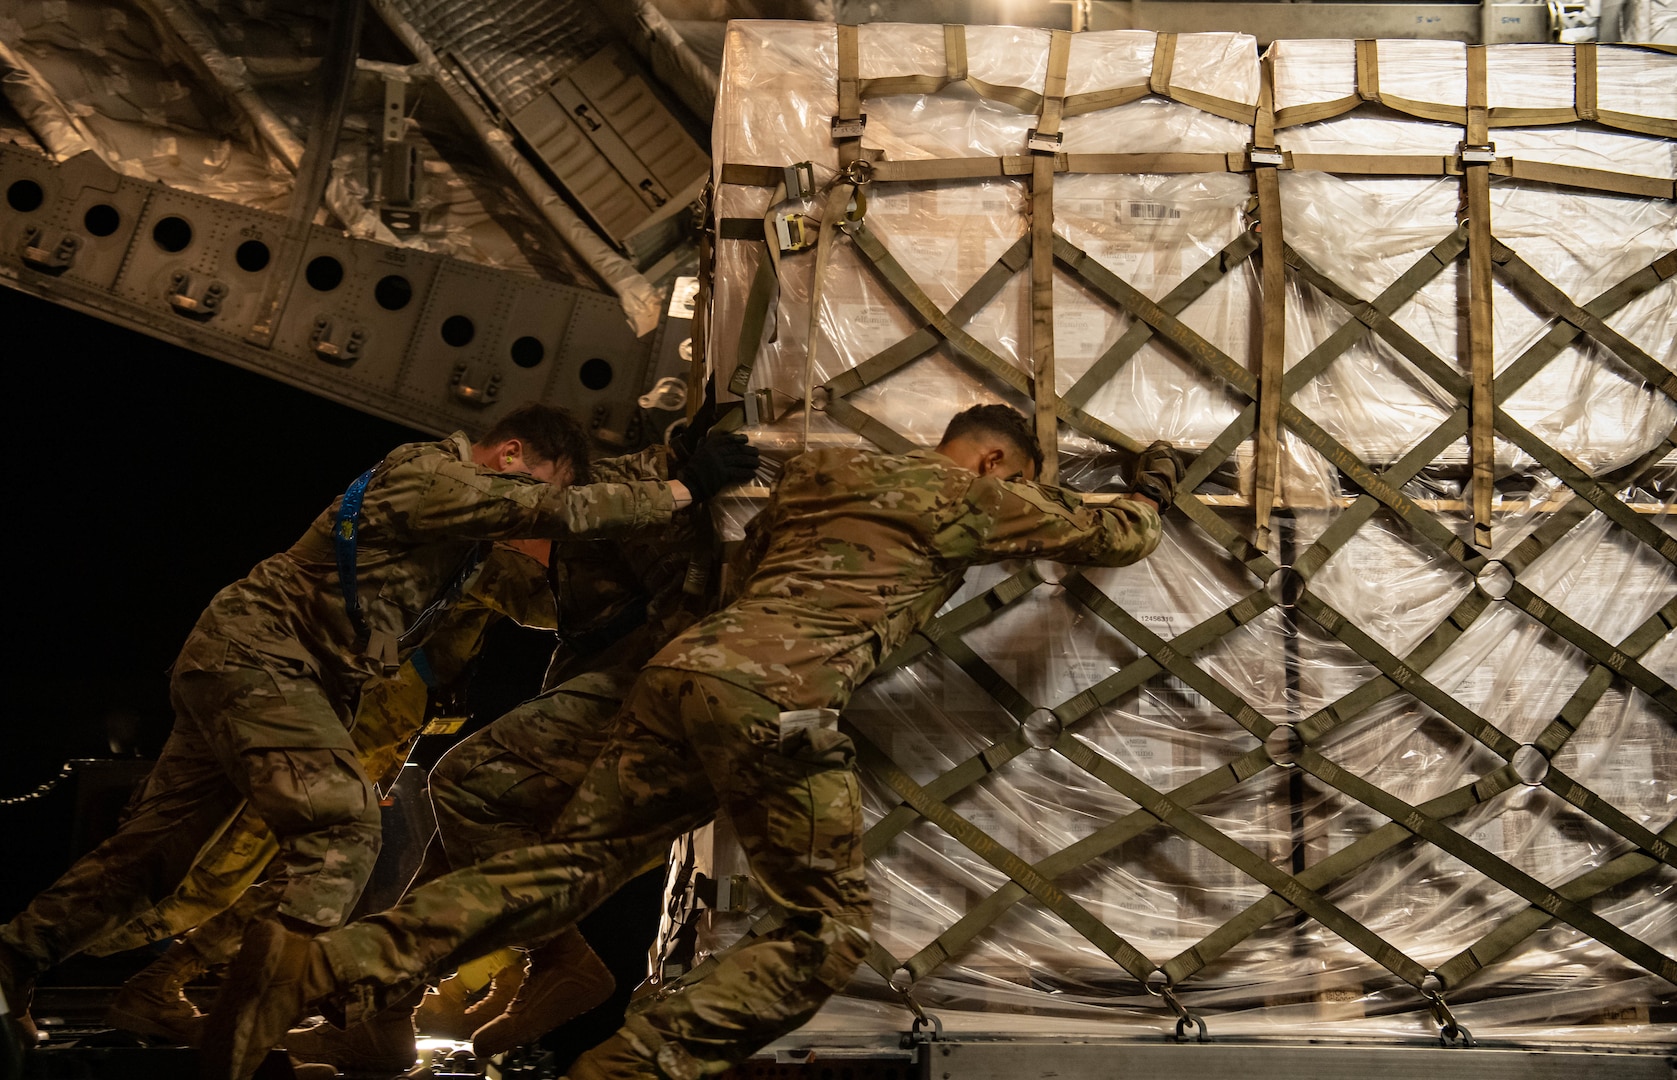 U.S. Air Force Airmen assigned to the 721st Aerial Port Squadron load a pallet of infant formula onto a C-17 Globemaster lll aircraft assigned to Joint Base Pearl Harbor-Hickam, Hawaii, at Ramstein Air Base, Germany, May 22, 2022. The infant formula arrived from Switzerland as part of the U.S. Government’s Operation Fly Formula to rapidly transport infant formula to the United States due to critical shortages there. Under Operation Fly Formula, the USDA and the Department of Health and Human Services are authorized to request Department of Defense support to pick up overseas infant formula that meets U.S. health and safety standards. (U.S. Air Force photo by Airman 1st Class Jared Lovett)